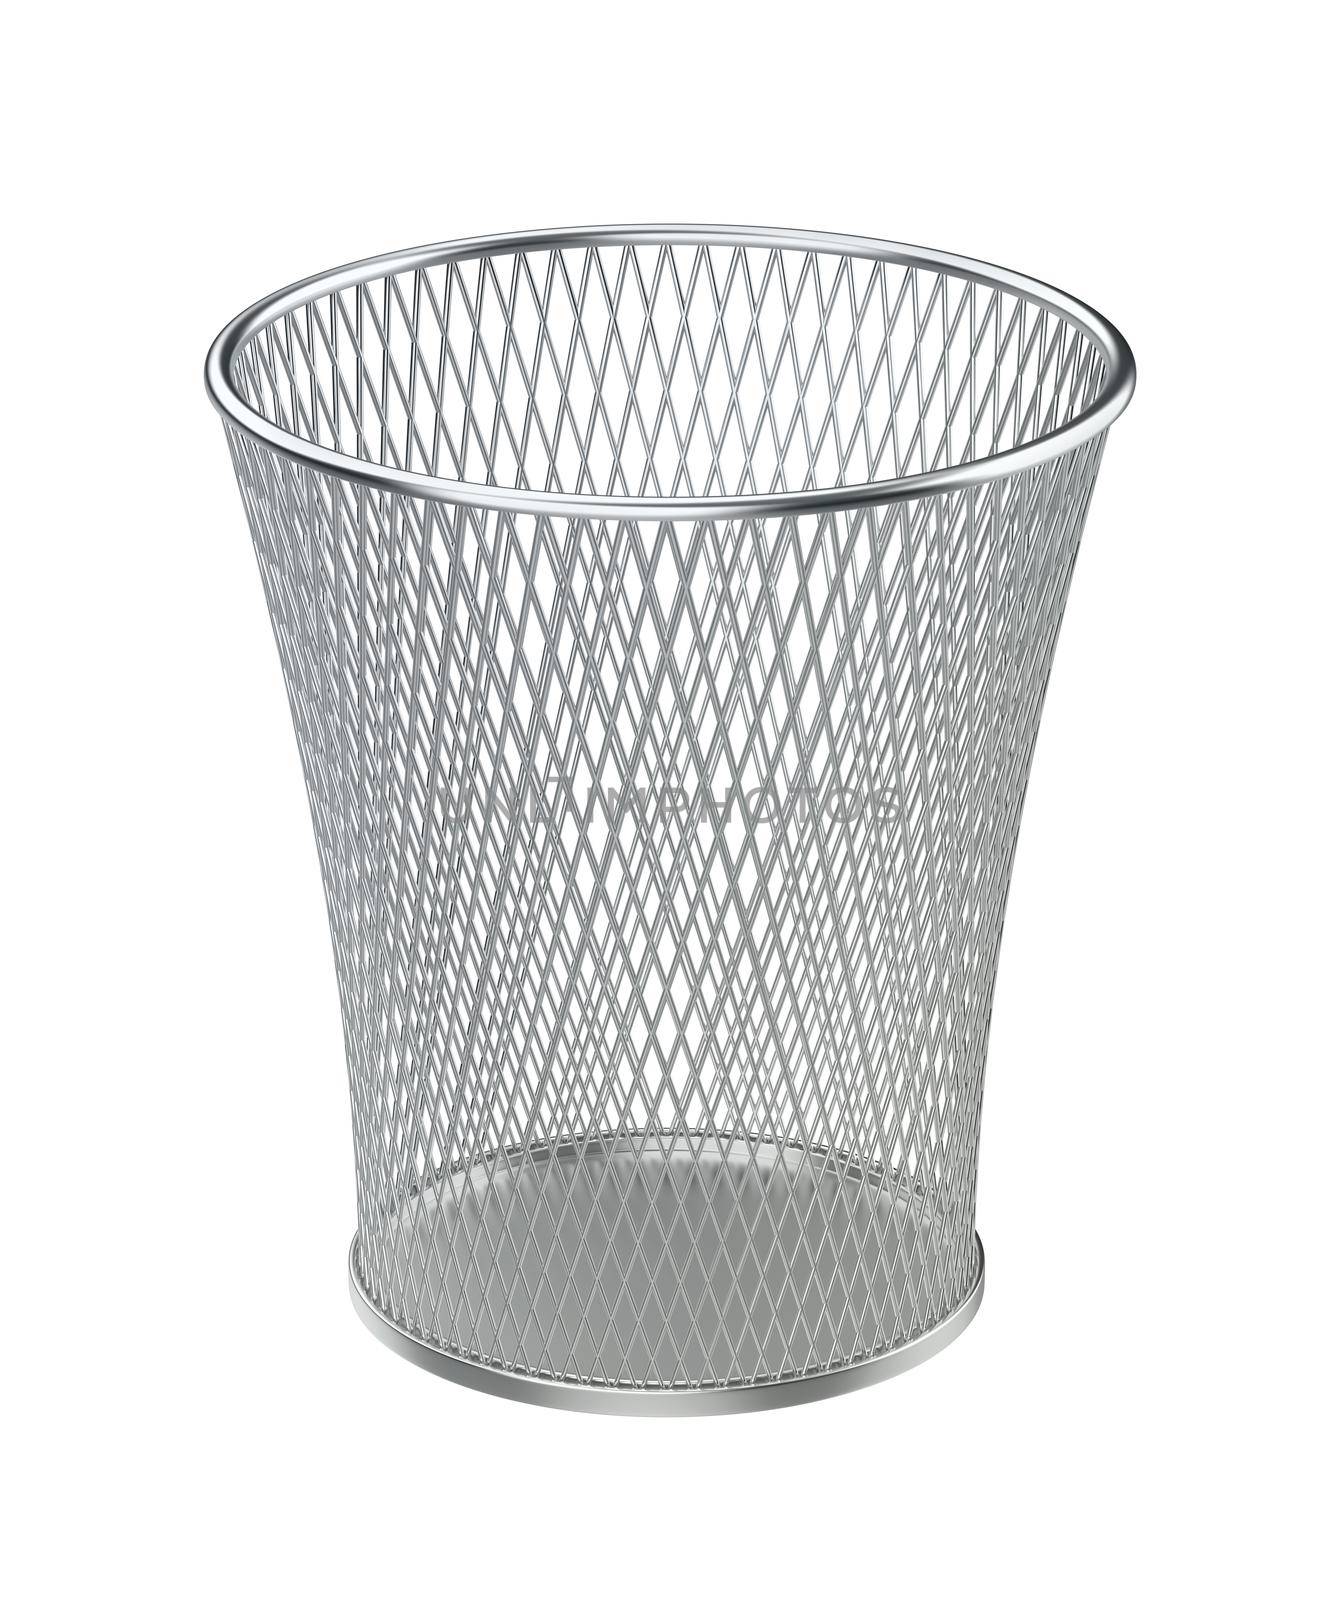 Silver wastepaper basket by magraphics